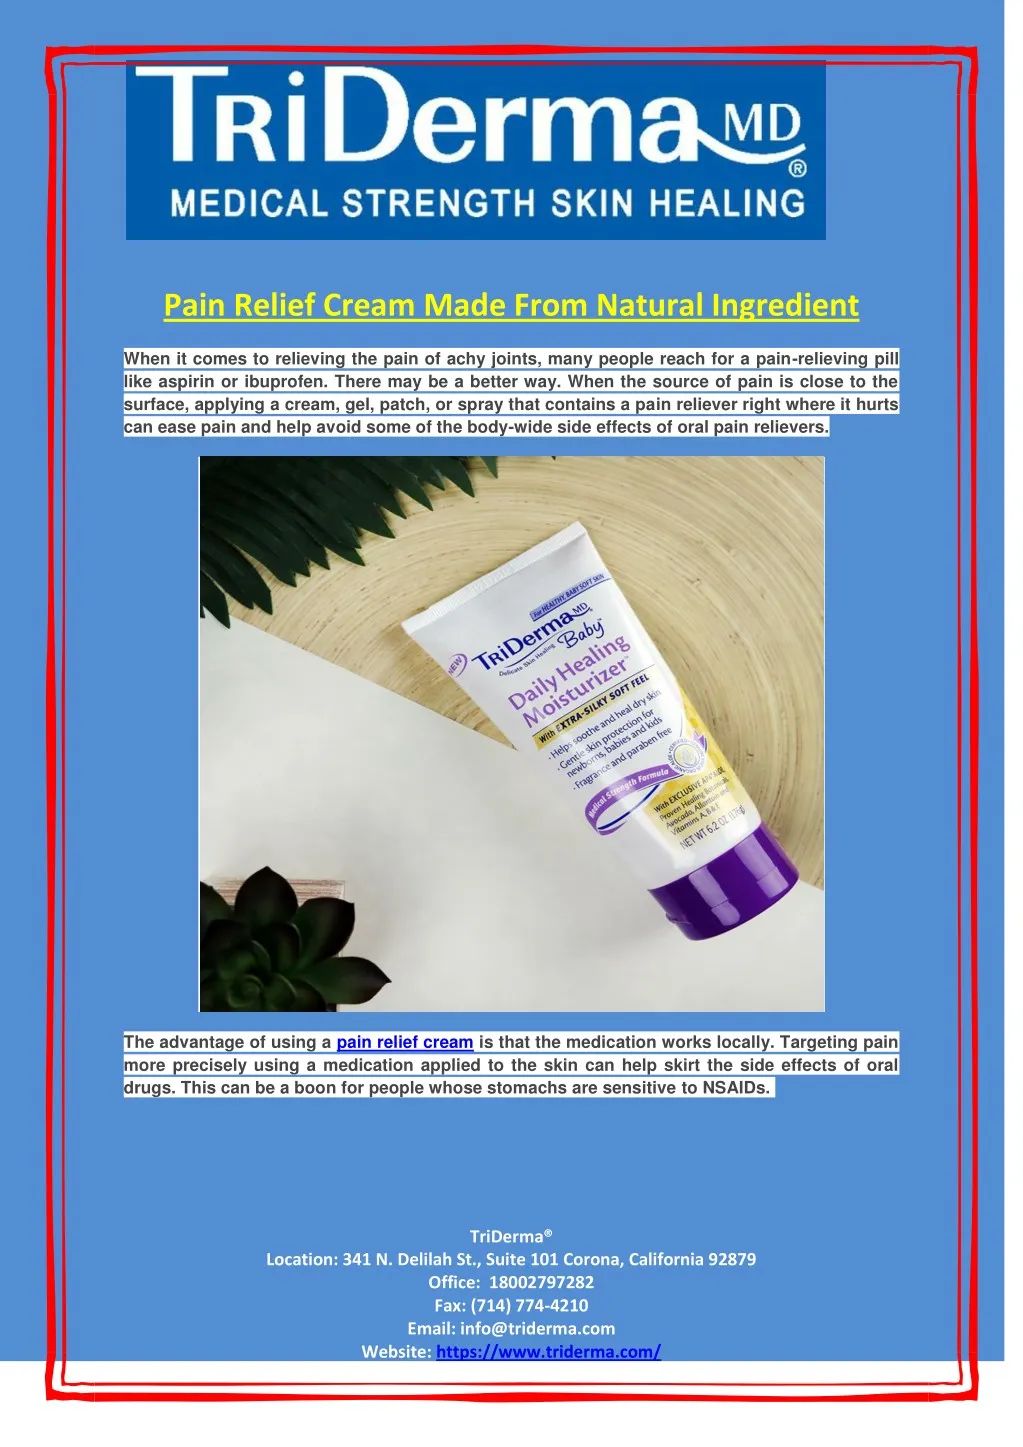 pain relief cream made from natural ingredient